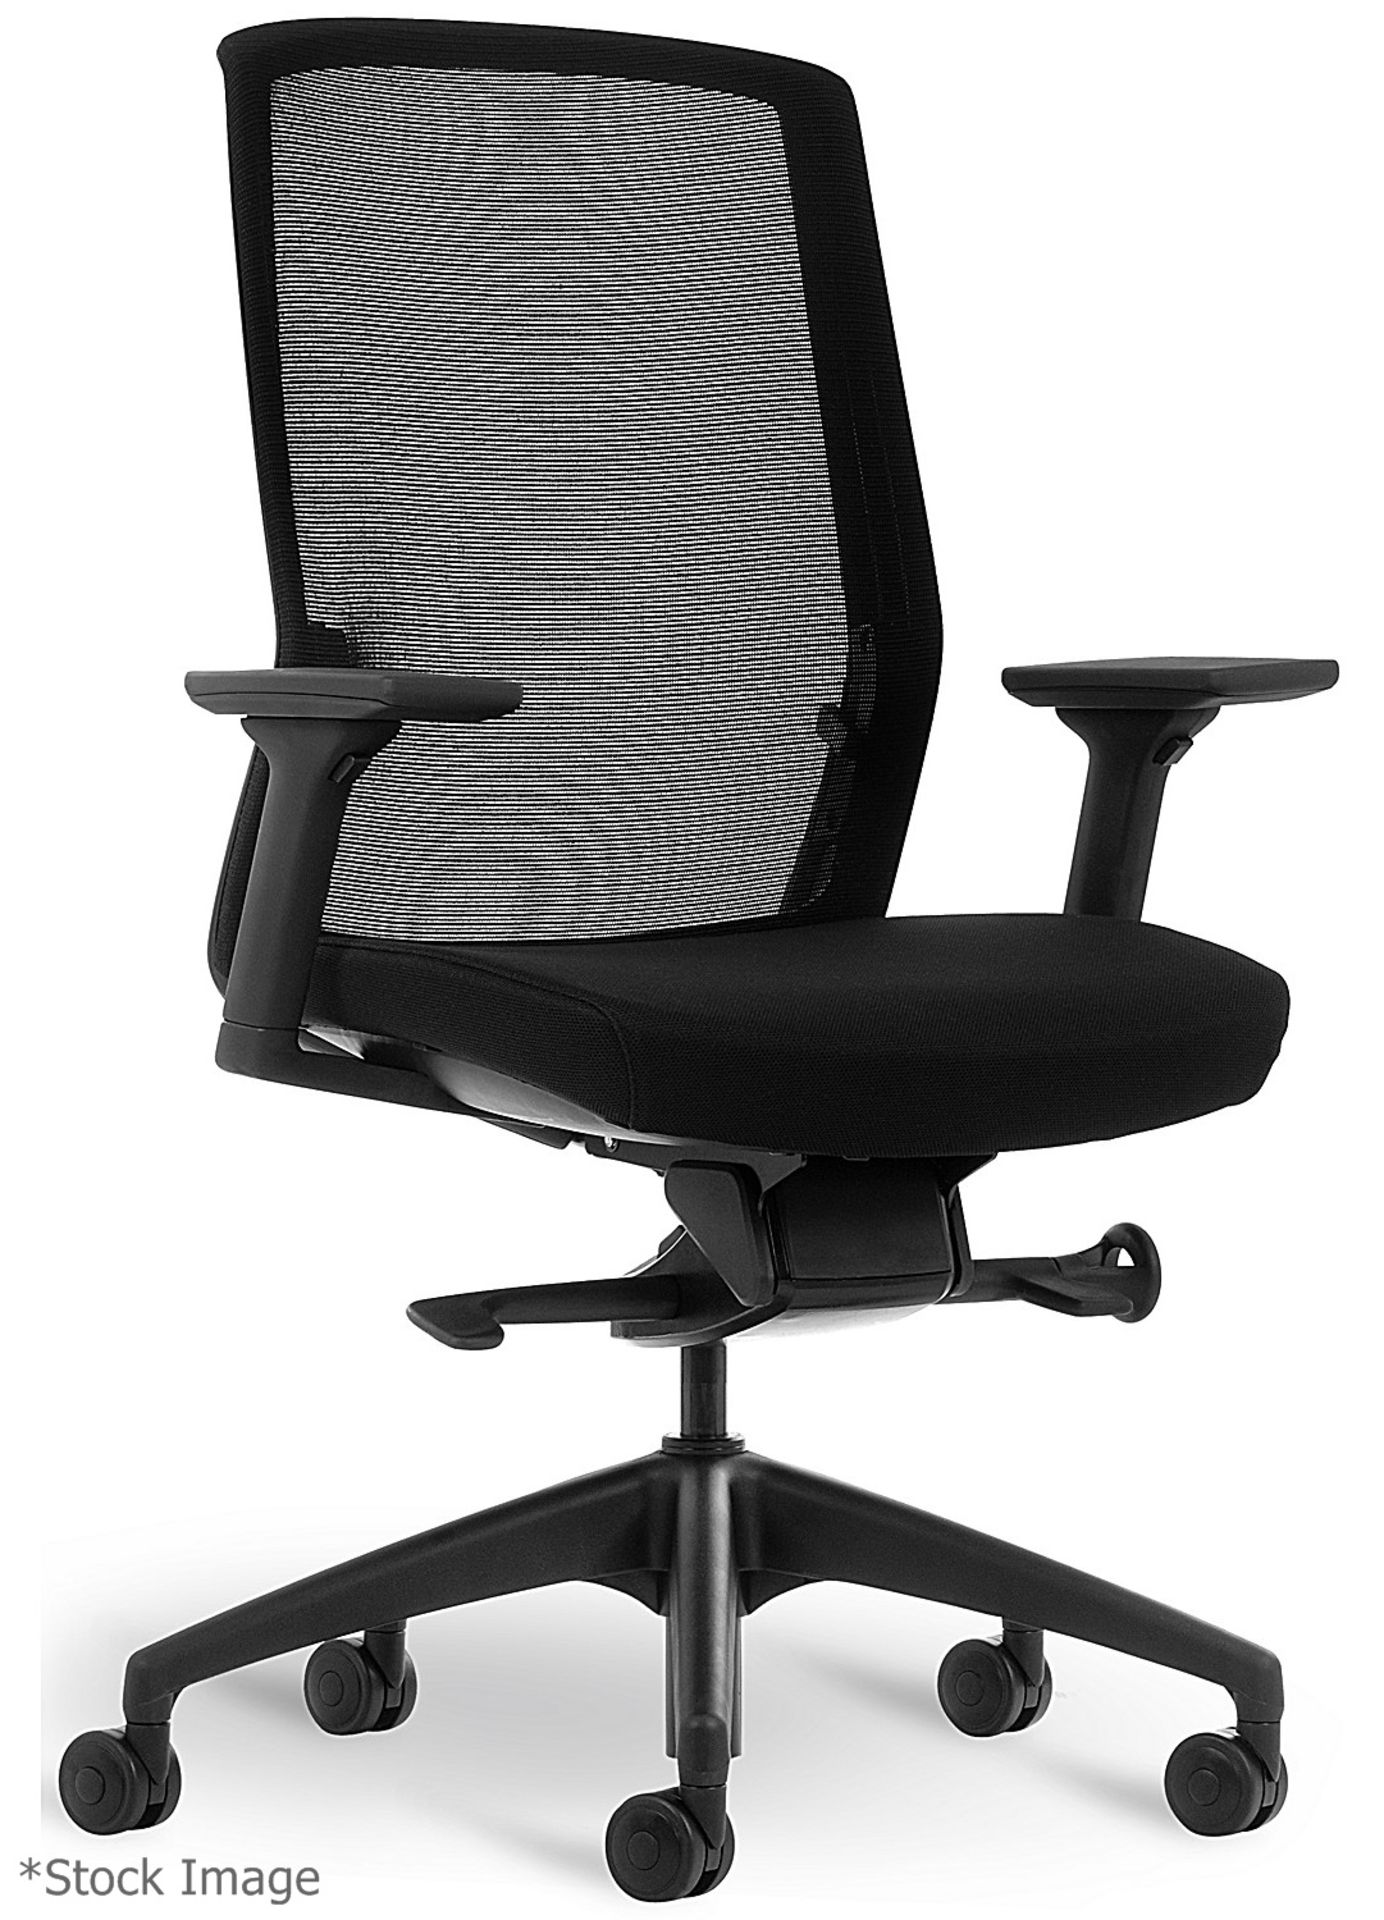 10 x BESTUHL J1 Ergonomic Office Chairs - To Be Removed From An Executive Office Environment -